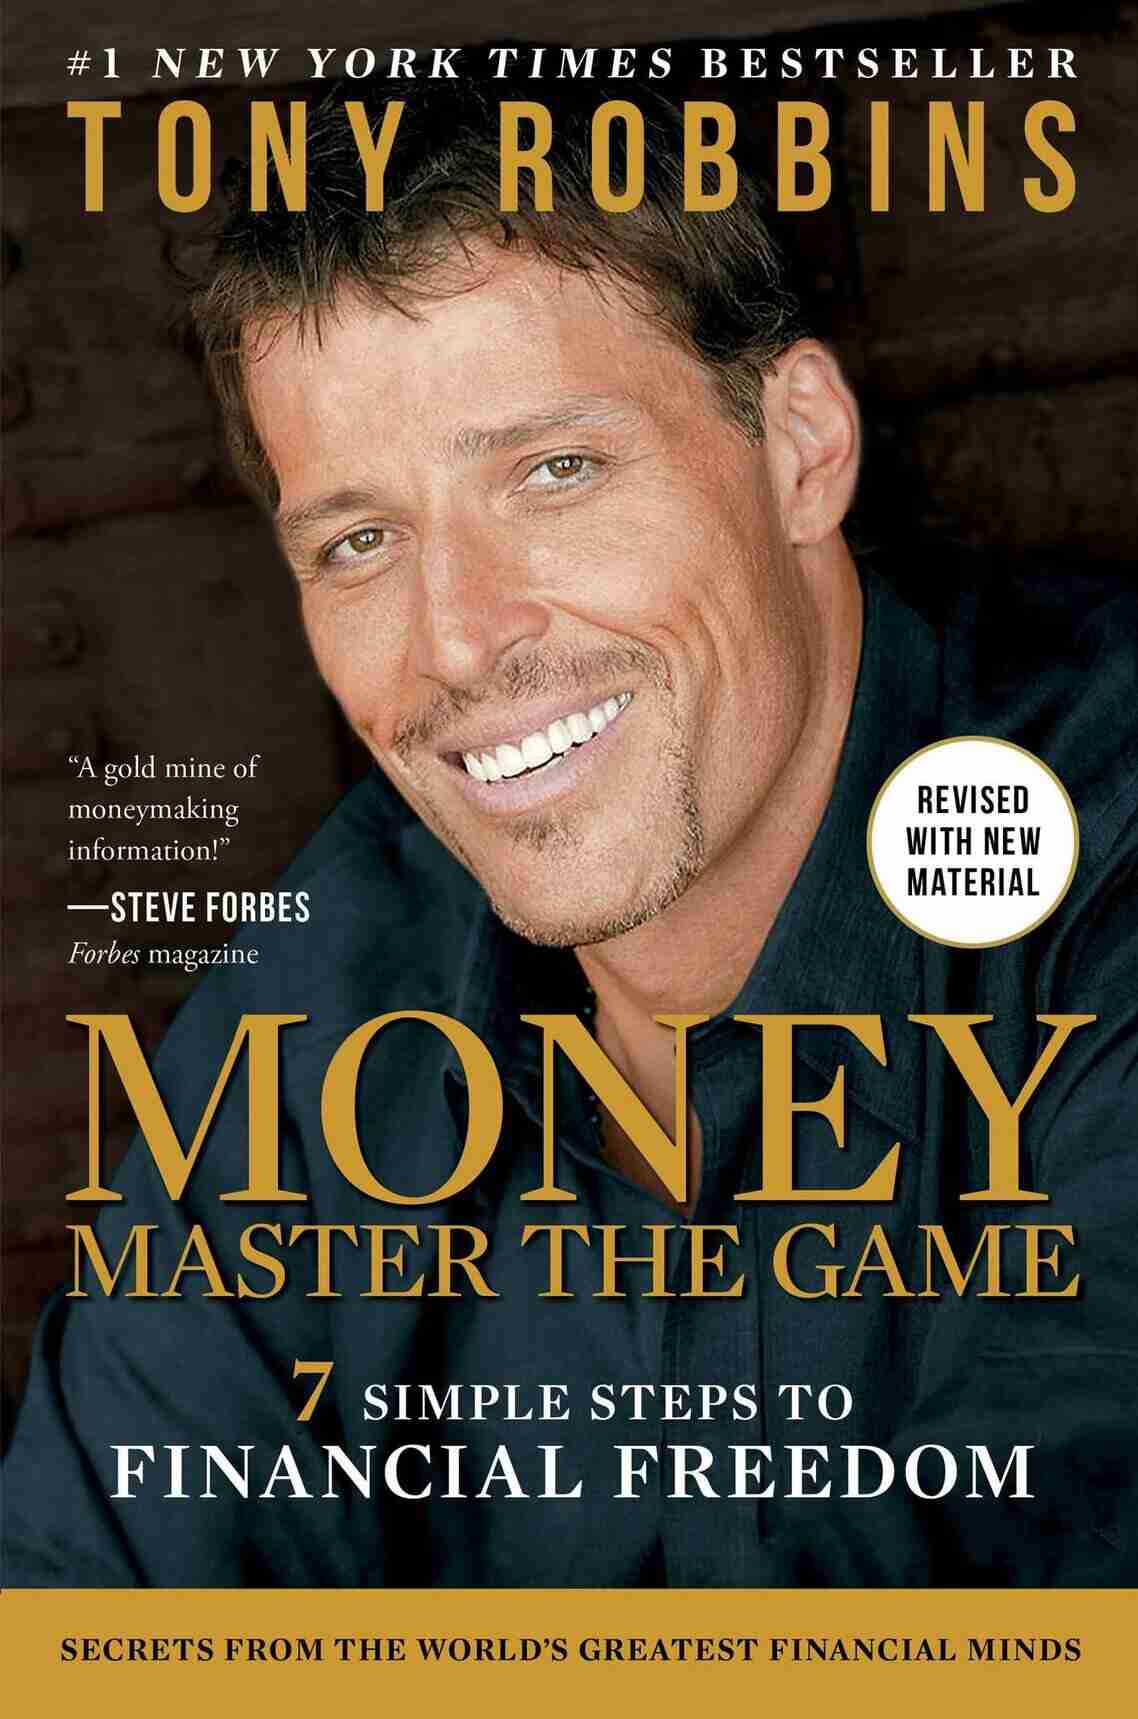 money master the game by tony robbins